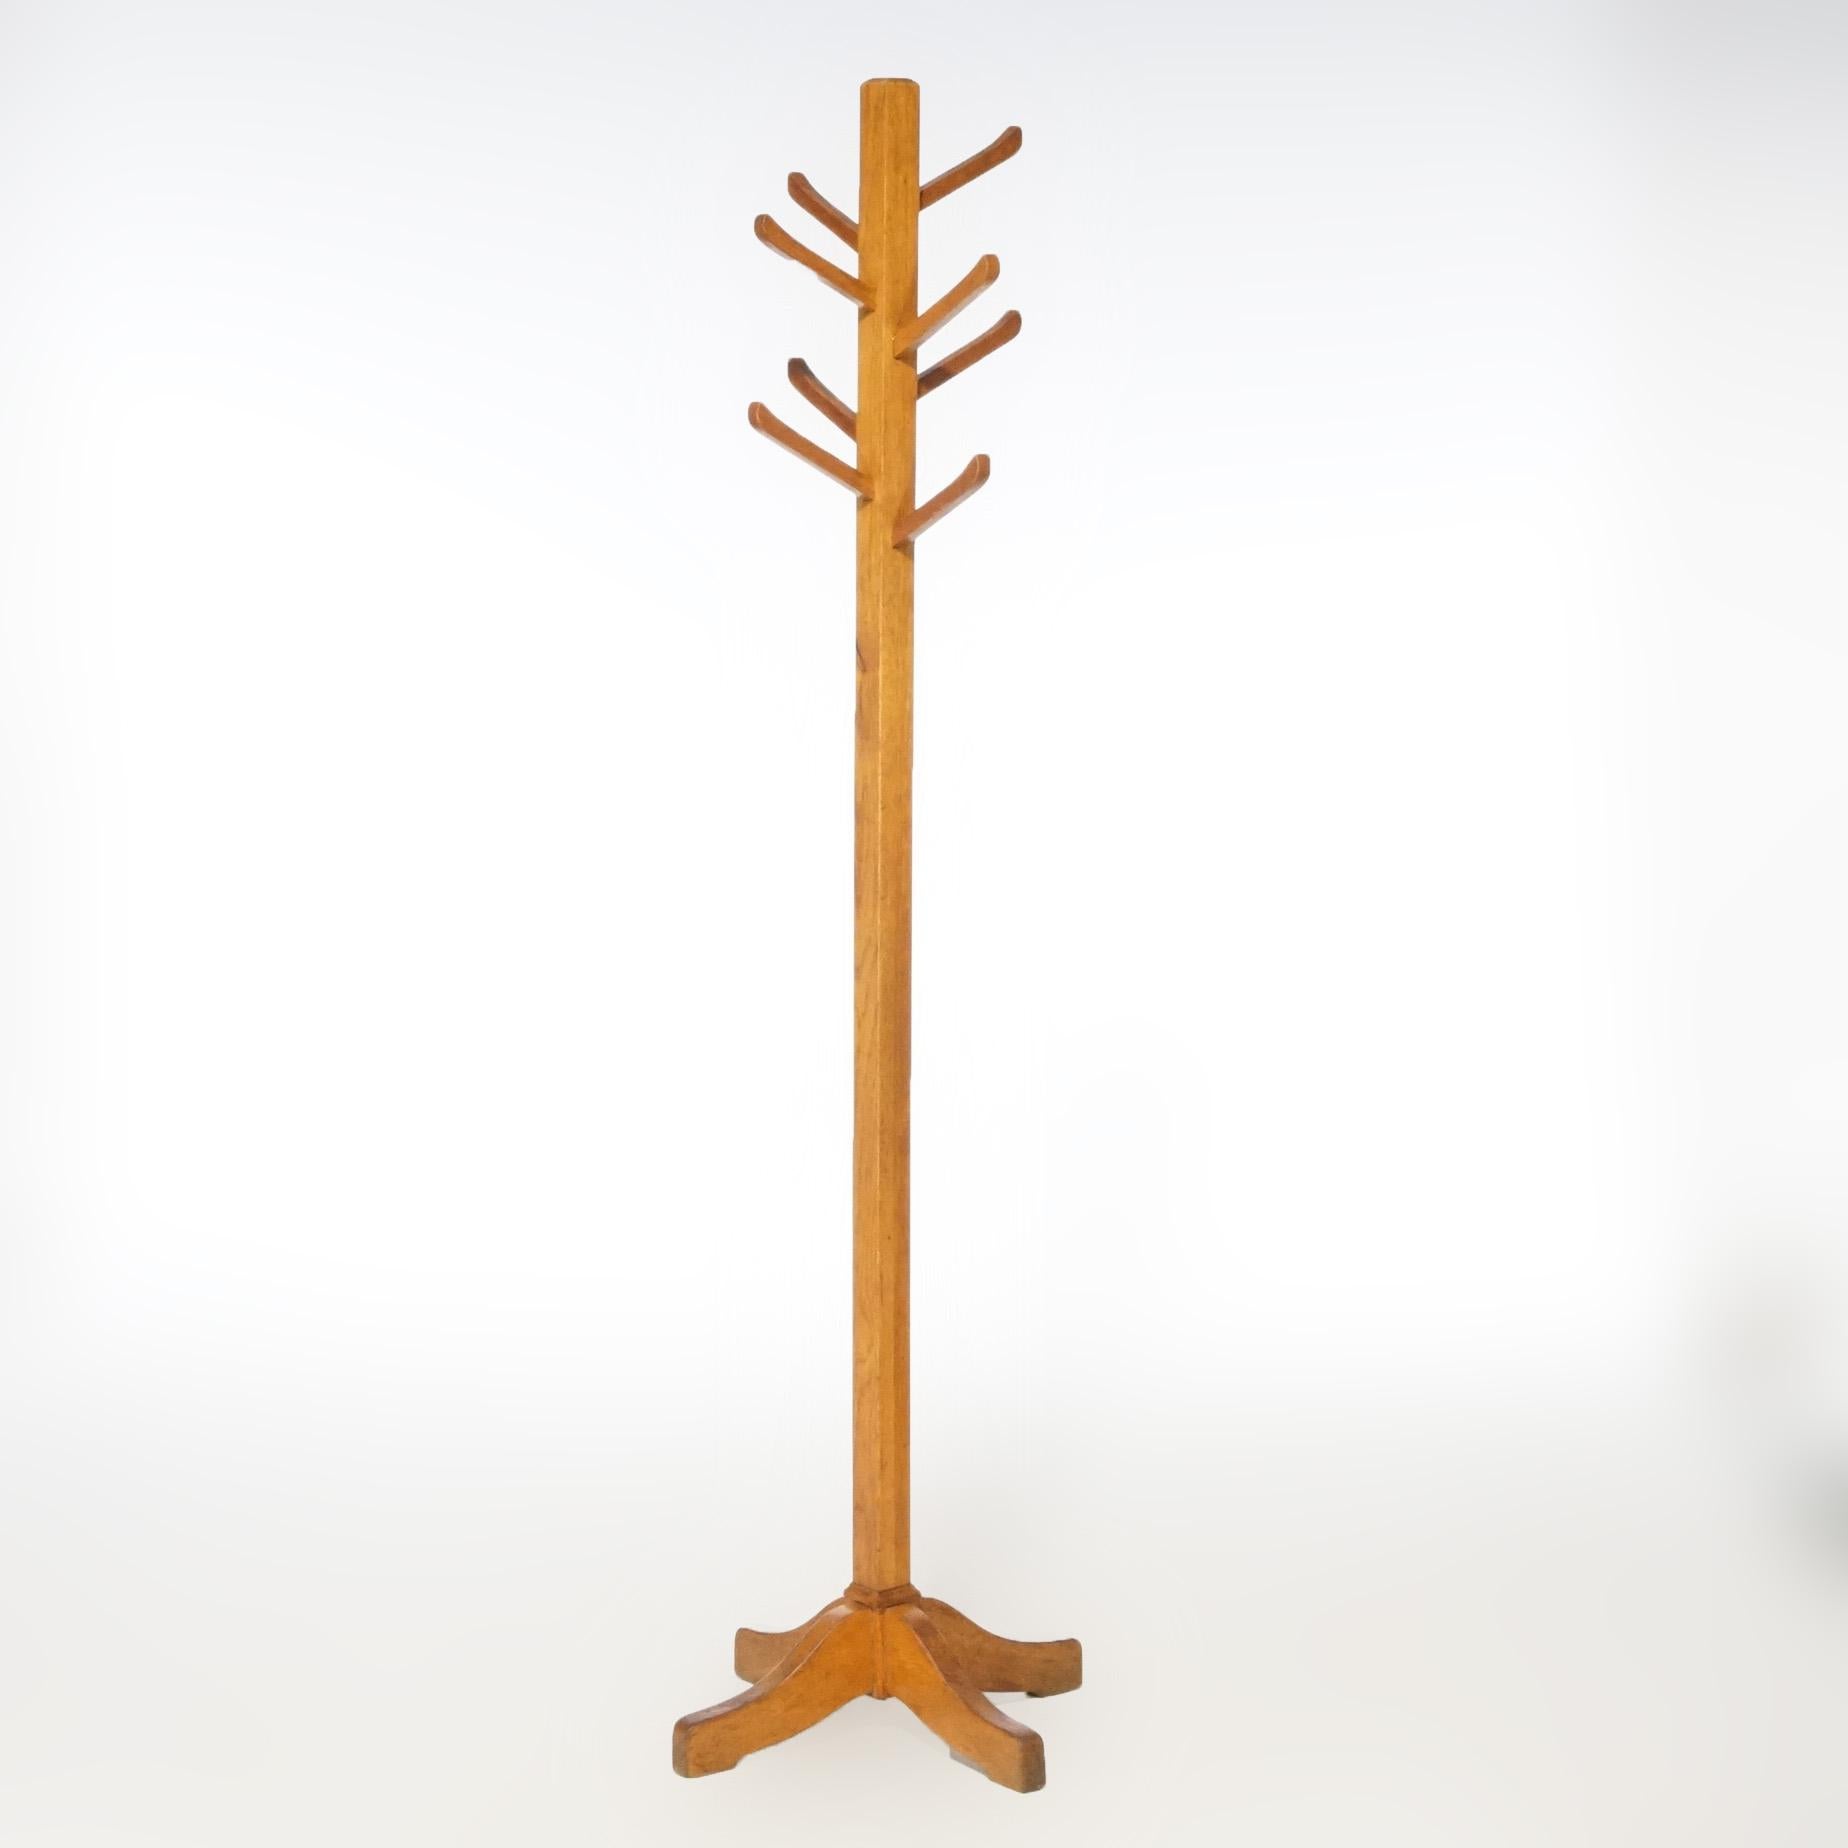 An antique Arts & Crafts Mission hall tree offers oak construction with square column and stylized wood hooks, c1910

Measures - 72